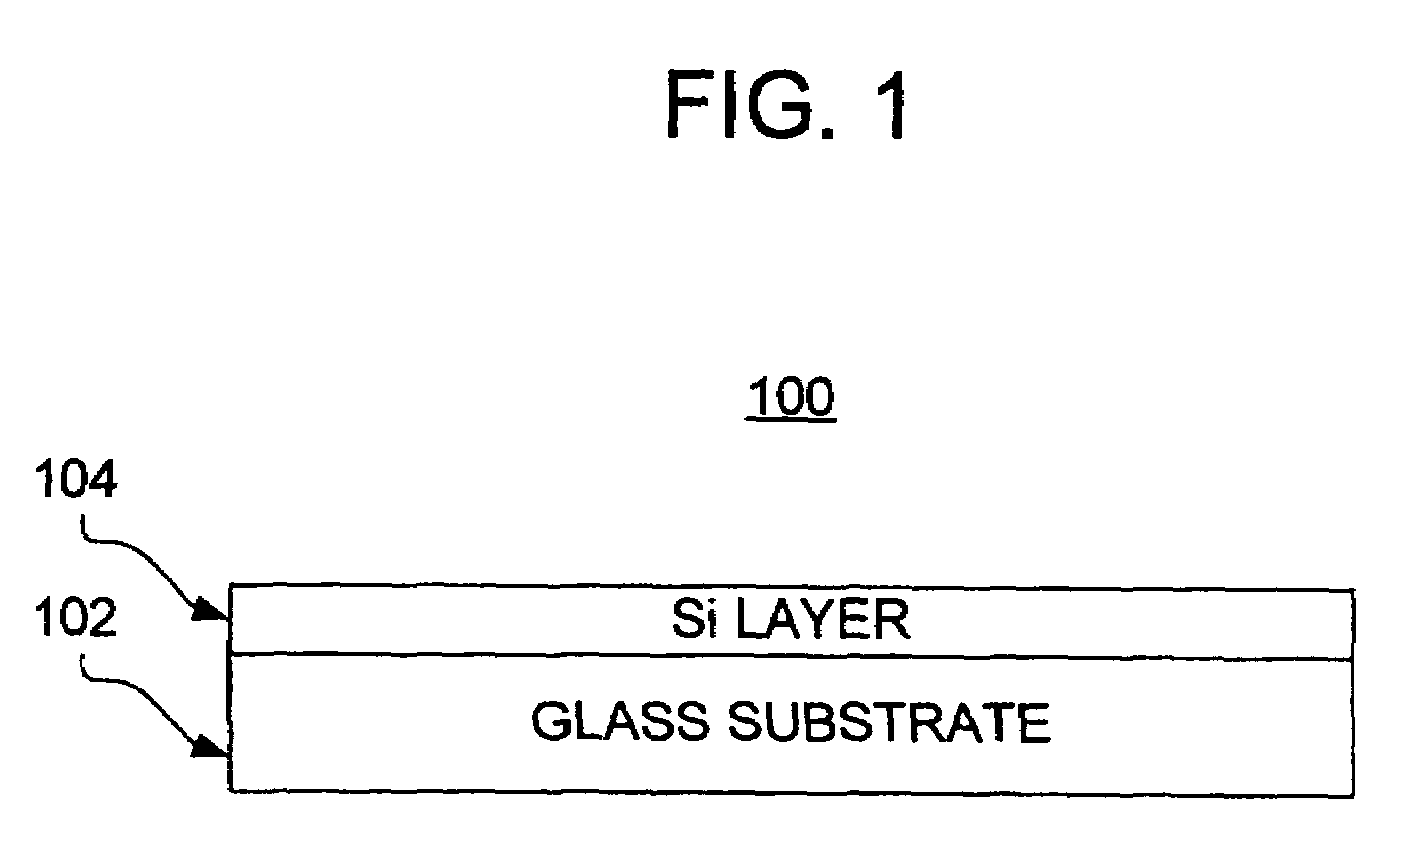 Glass-based semiconductor on insulator structures and methods of making same